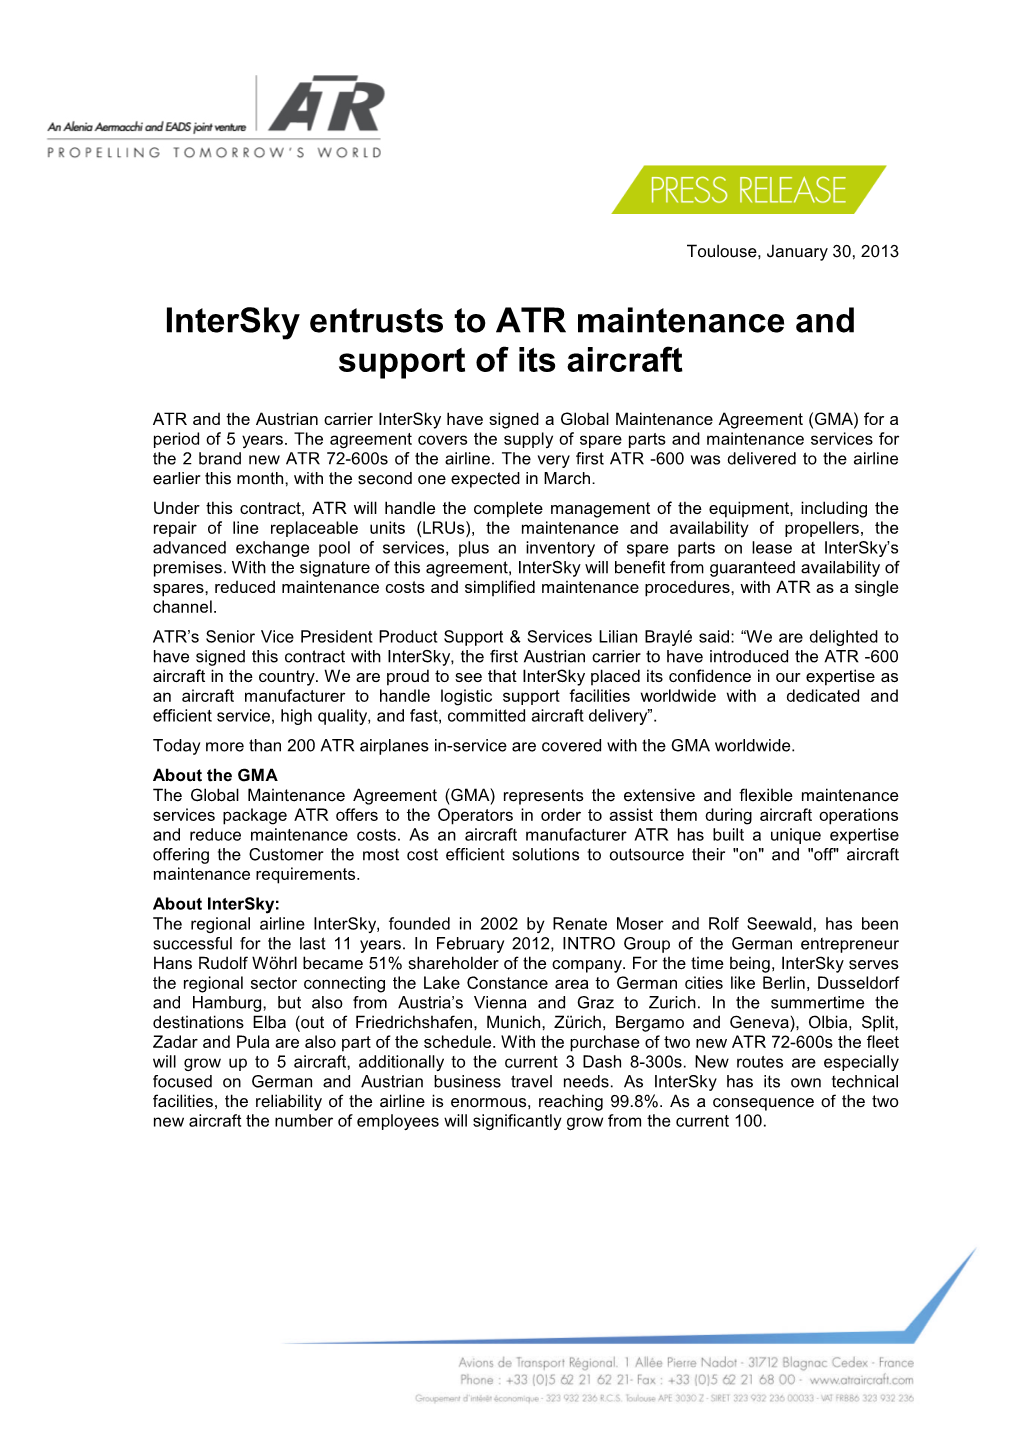 Intersky Entrusts to ATR Maintenance and Support of Its Aircraft